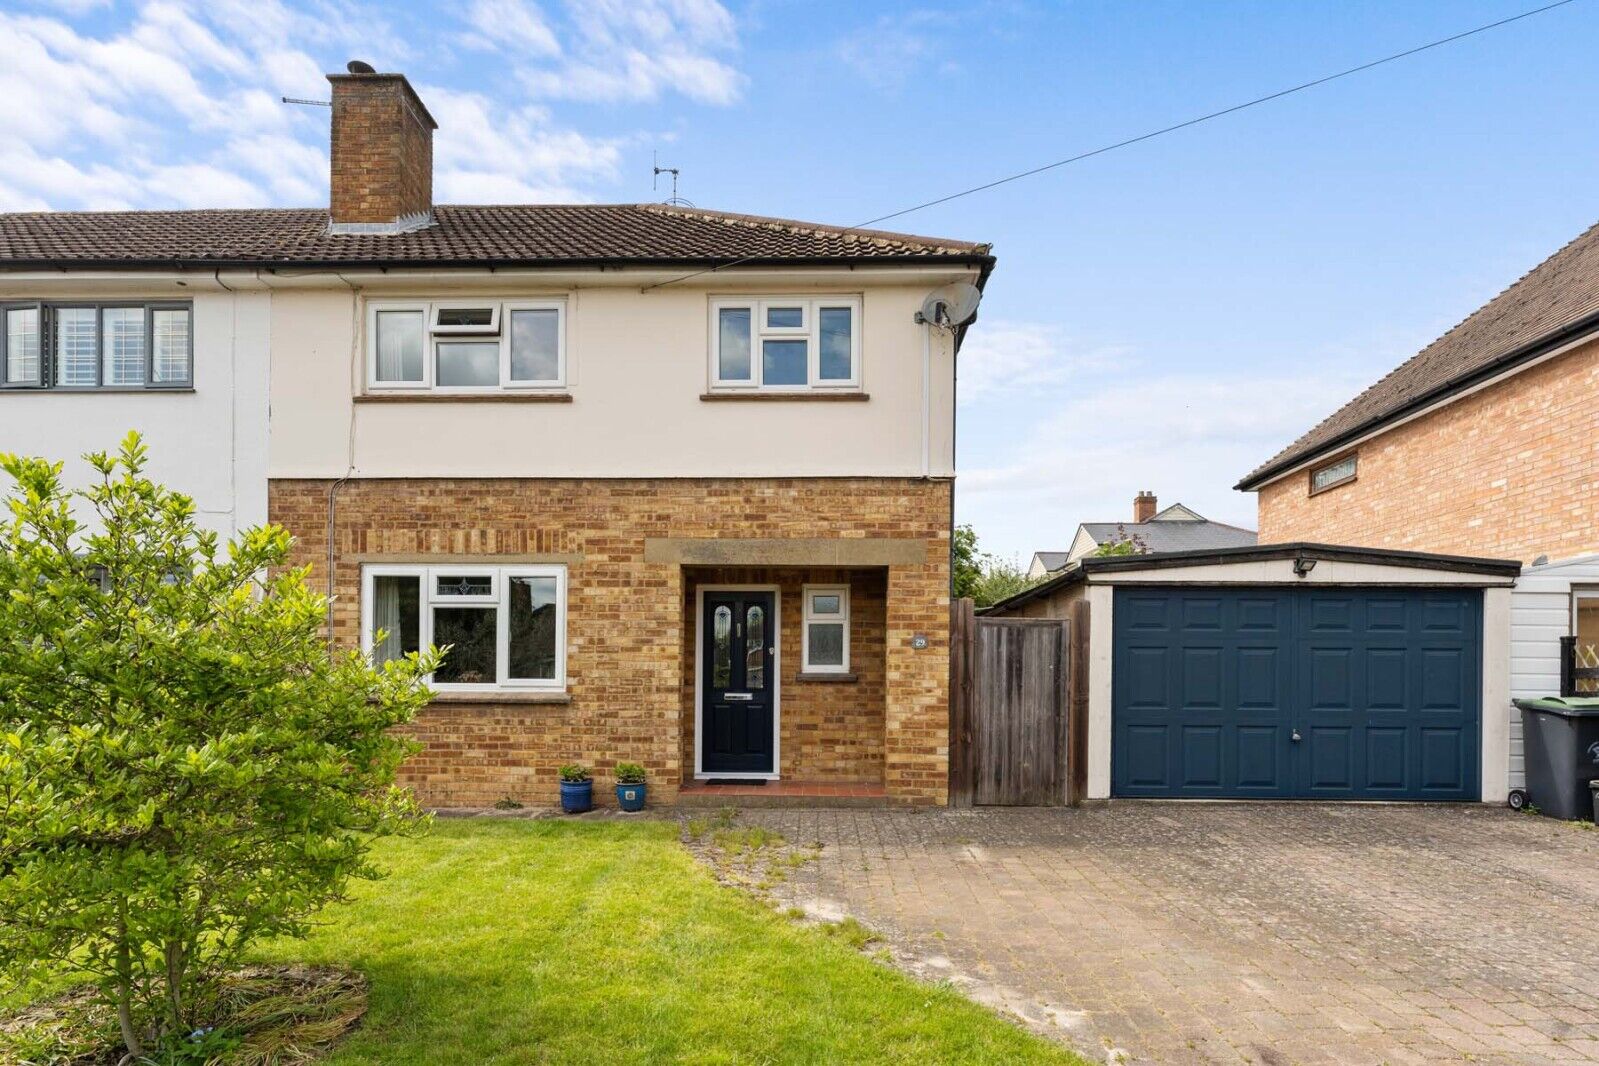 3 bedroom semi detached house for sale St. Johns Crescent, Stansted, CM24, main image